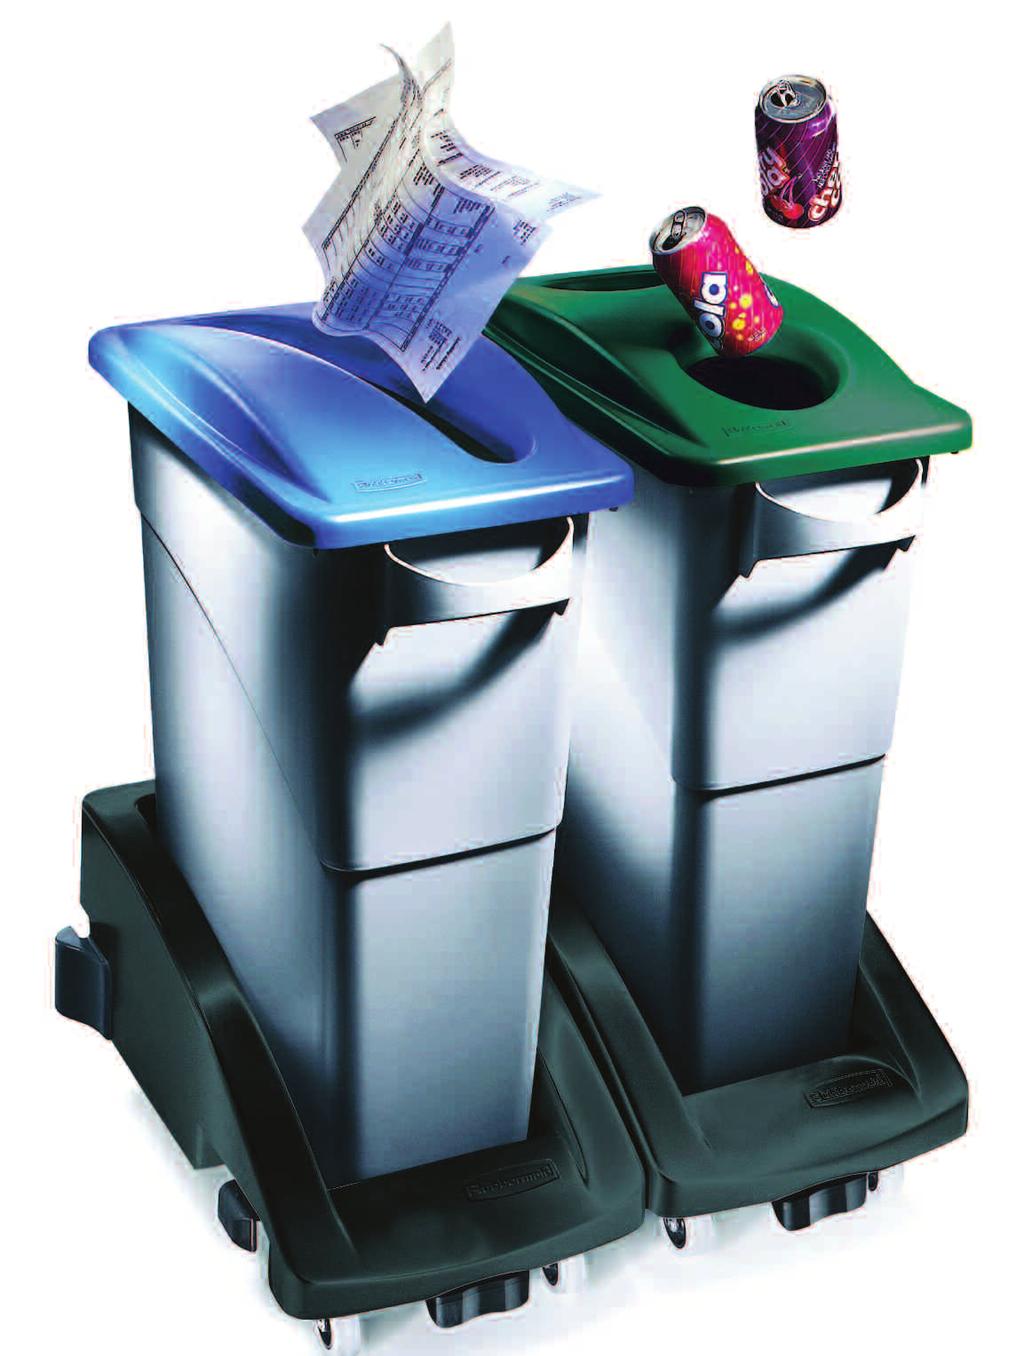 TOPS Encourage waste separation and recycling with interchangeable, color-coded tops New Swing Lid conceals waste from view and provides greater access New Hinge Lid folds flat while in use and